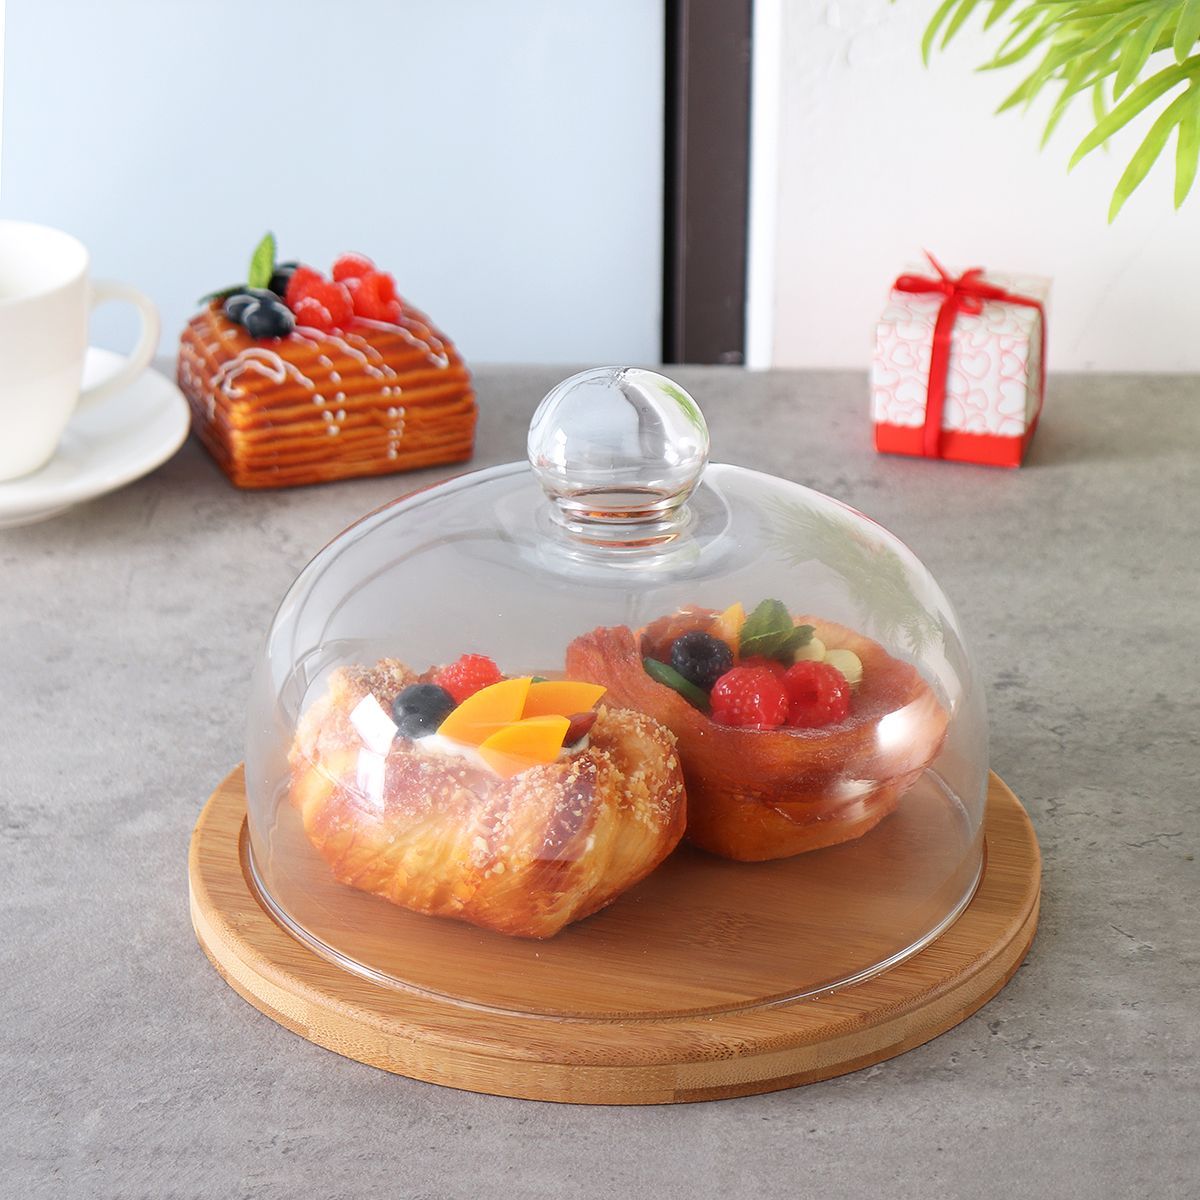 21cm-Glass-Cake-Dessert-Dome-Cover-With-Rotating-Bamboo-Base-Kitchen-Storage-Container-1434670